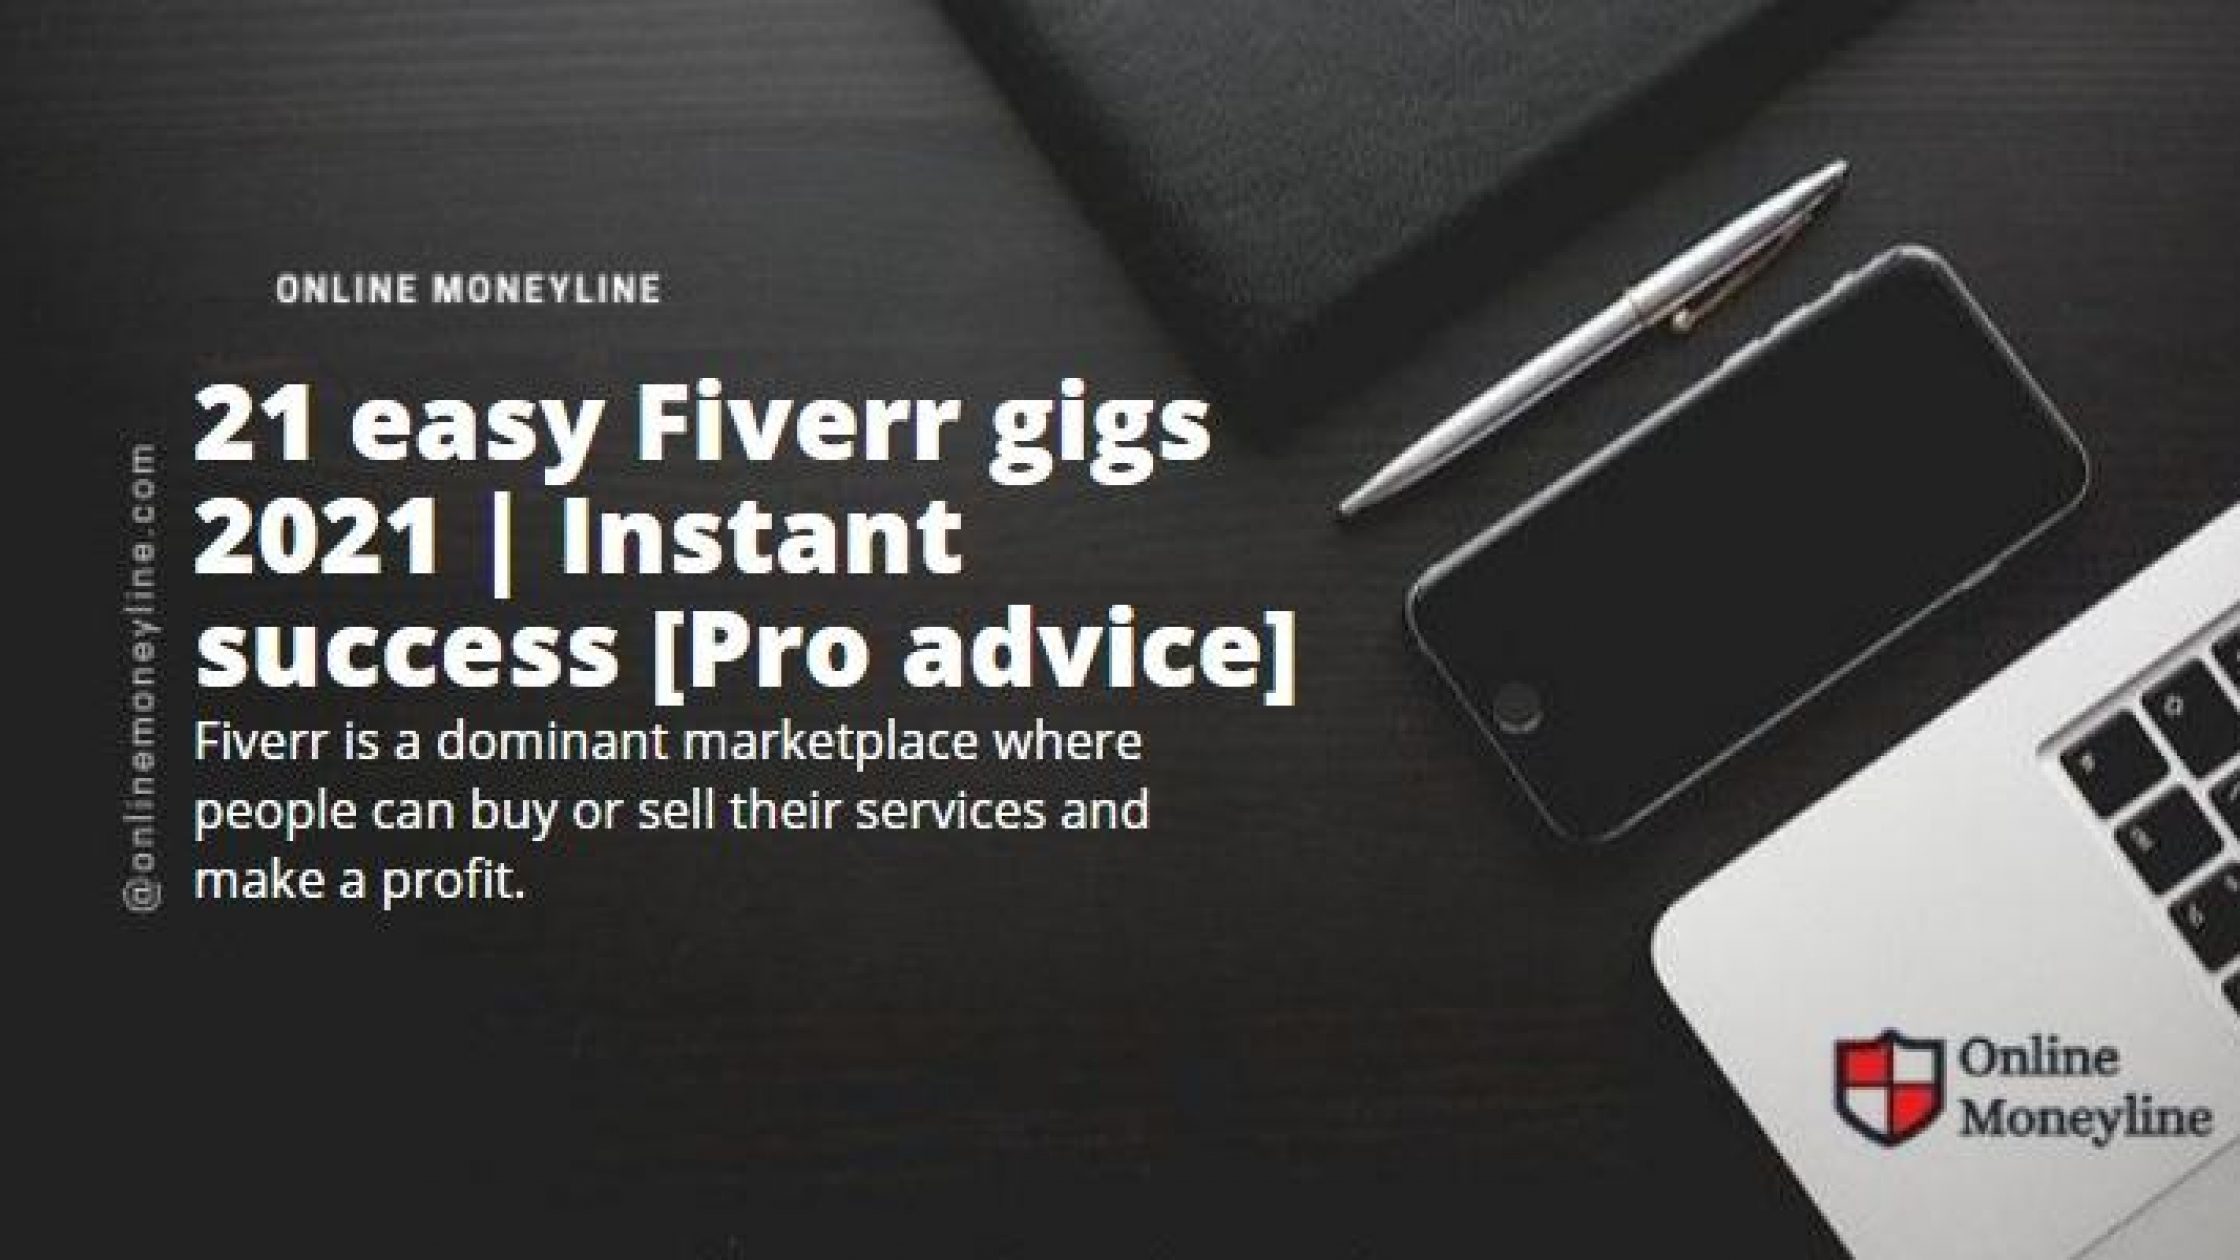 21 easy Fiverr gigs 2021 | Instant success [Pro advice]